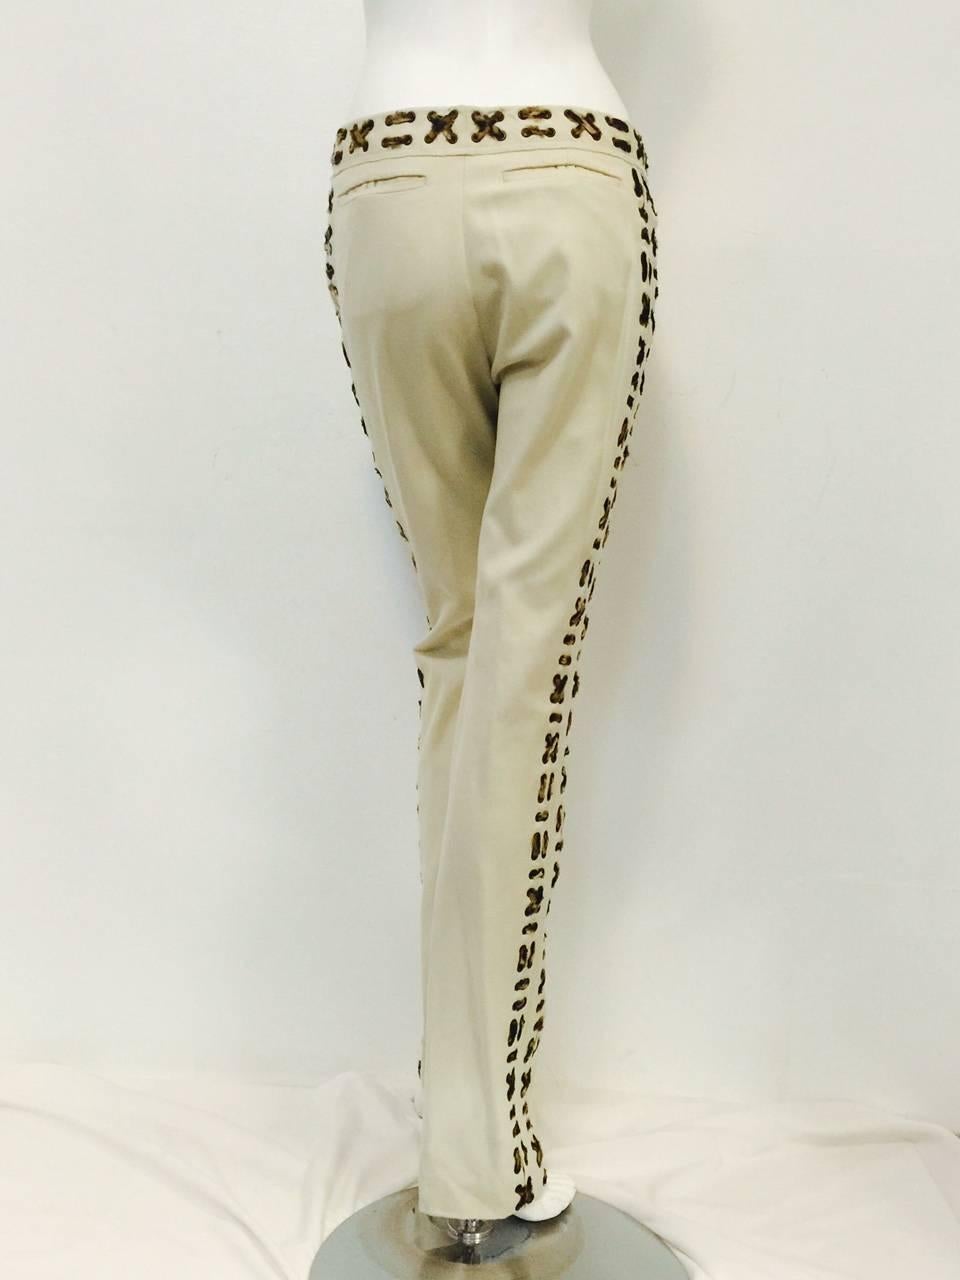 Iconic 2002 Tom Ford for Yves Saint Laurent Rive Gauche Mombasa Pant Suit  2